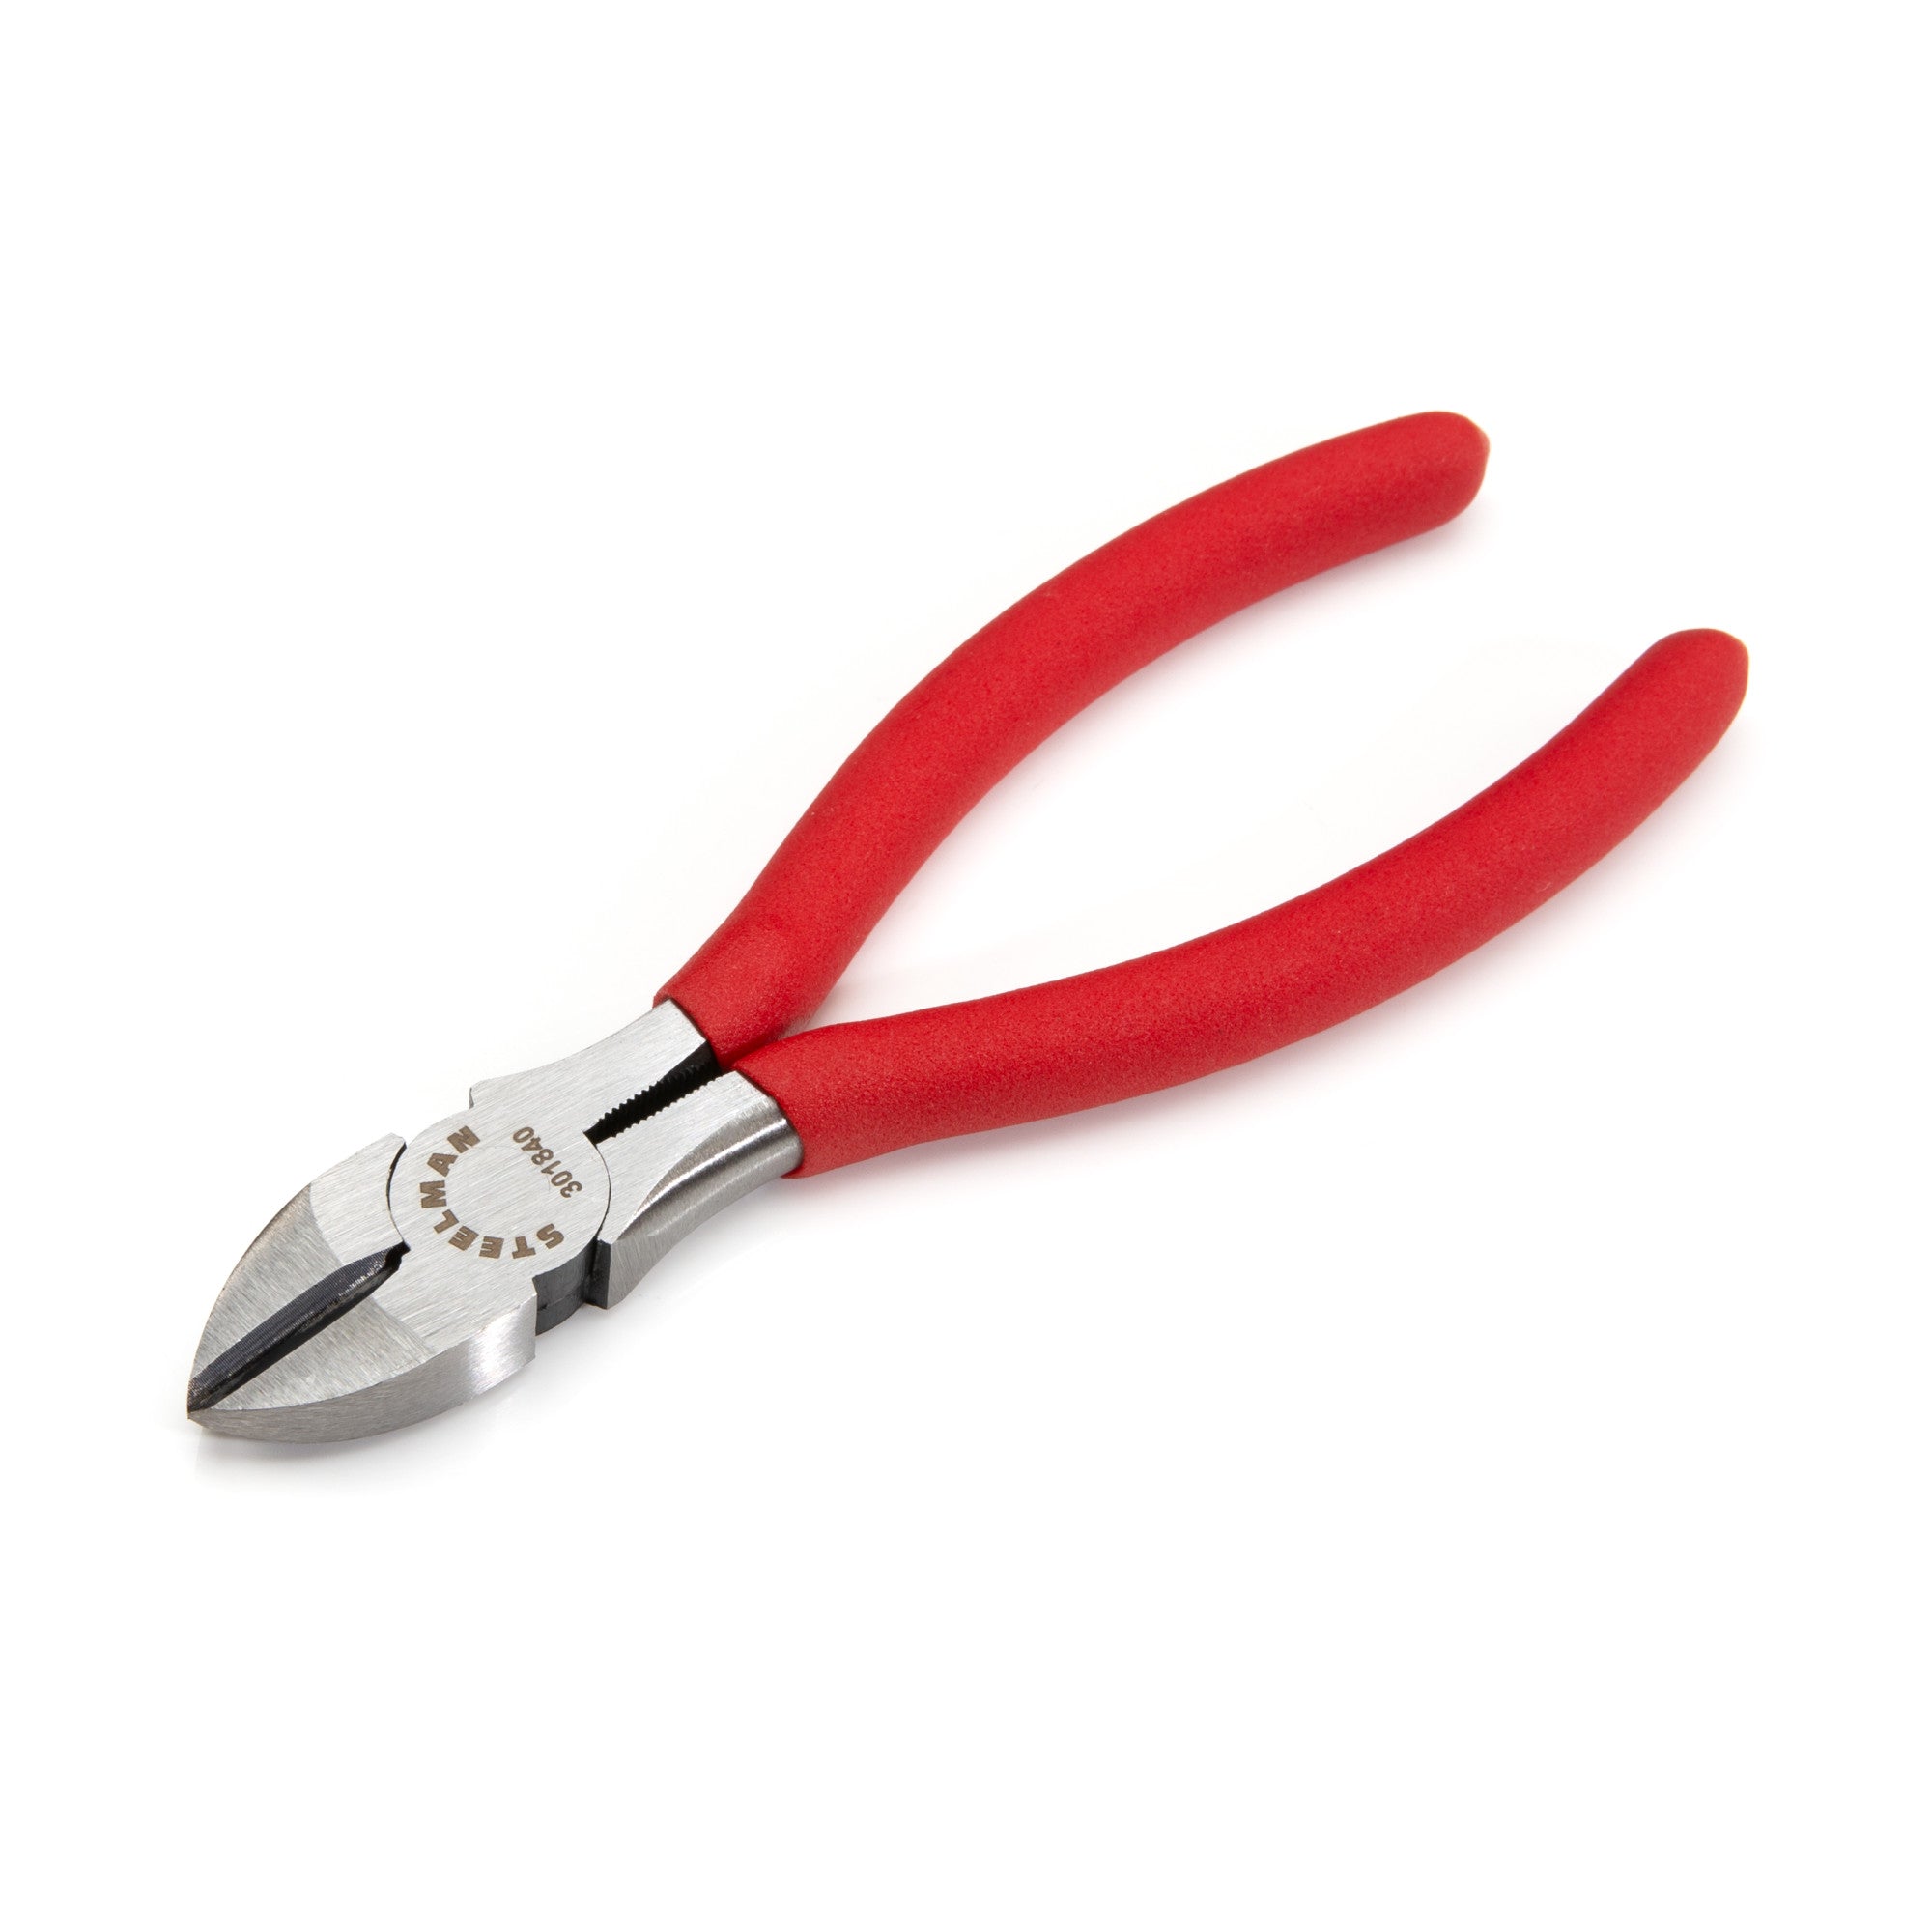 Steelman 301840 6-Inch Long Diagonal Cutters / Pliers with Wire Puller